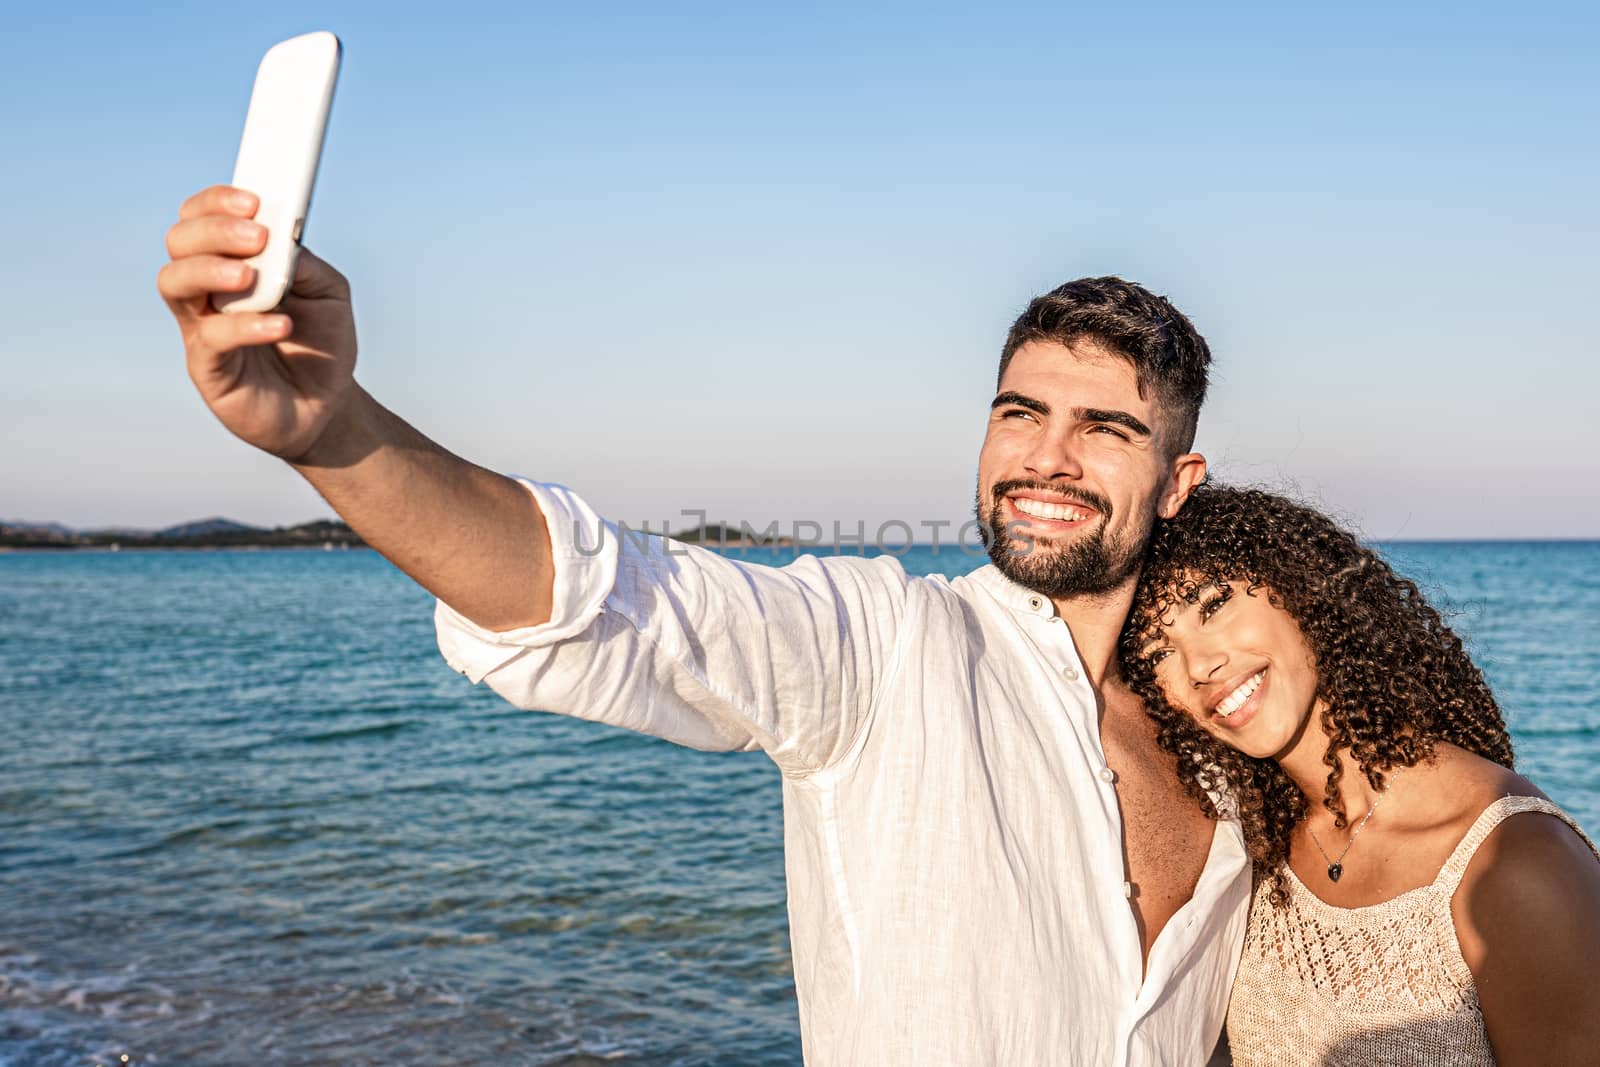 Young mixed race lovers couple at the sunset standing in the seashore makes a self portrait with the smartphone - Caucasian man having fun shooting photo in vacation with her black Hispanic girlfriend